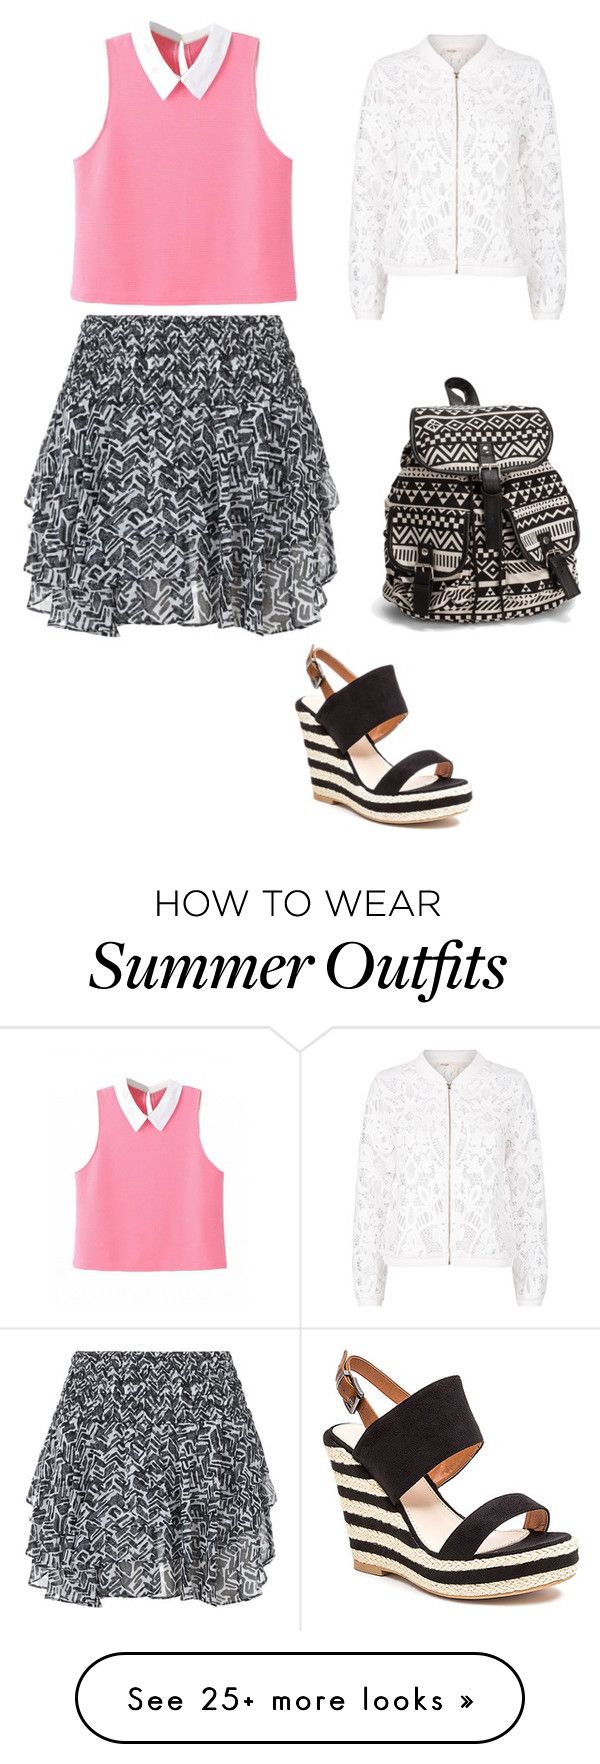 "Cute Summer Outfit " by lsantana13 on Polyvore featuring Misa, Maje, ...